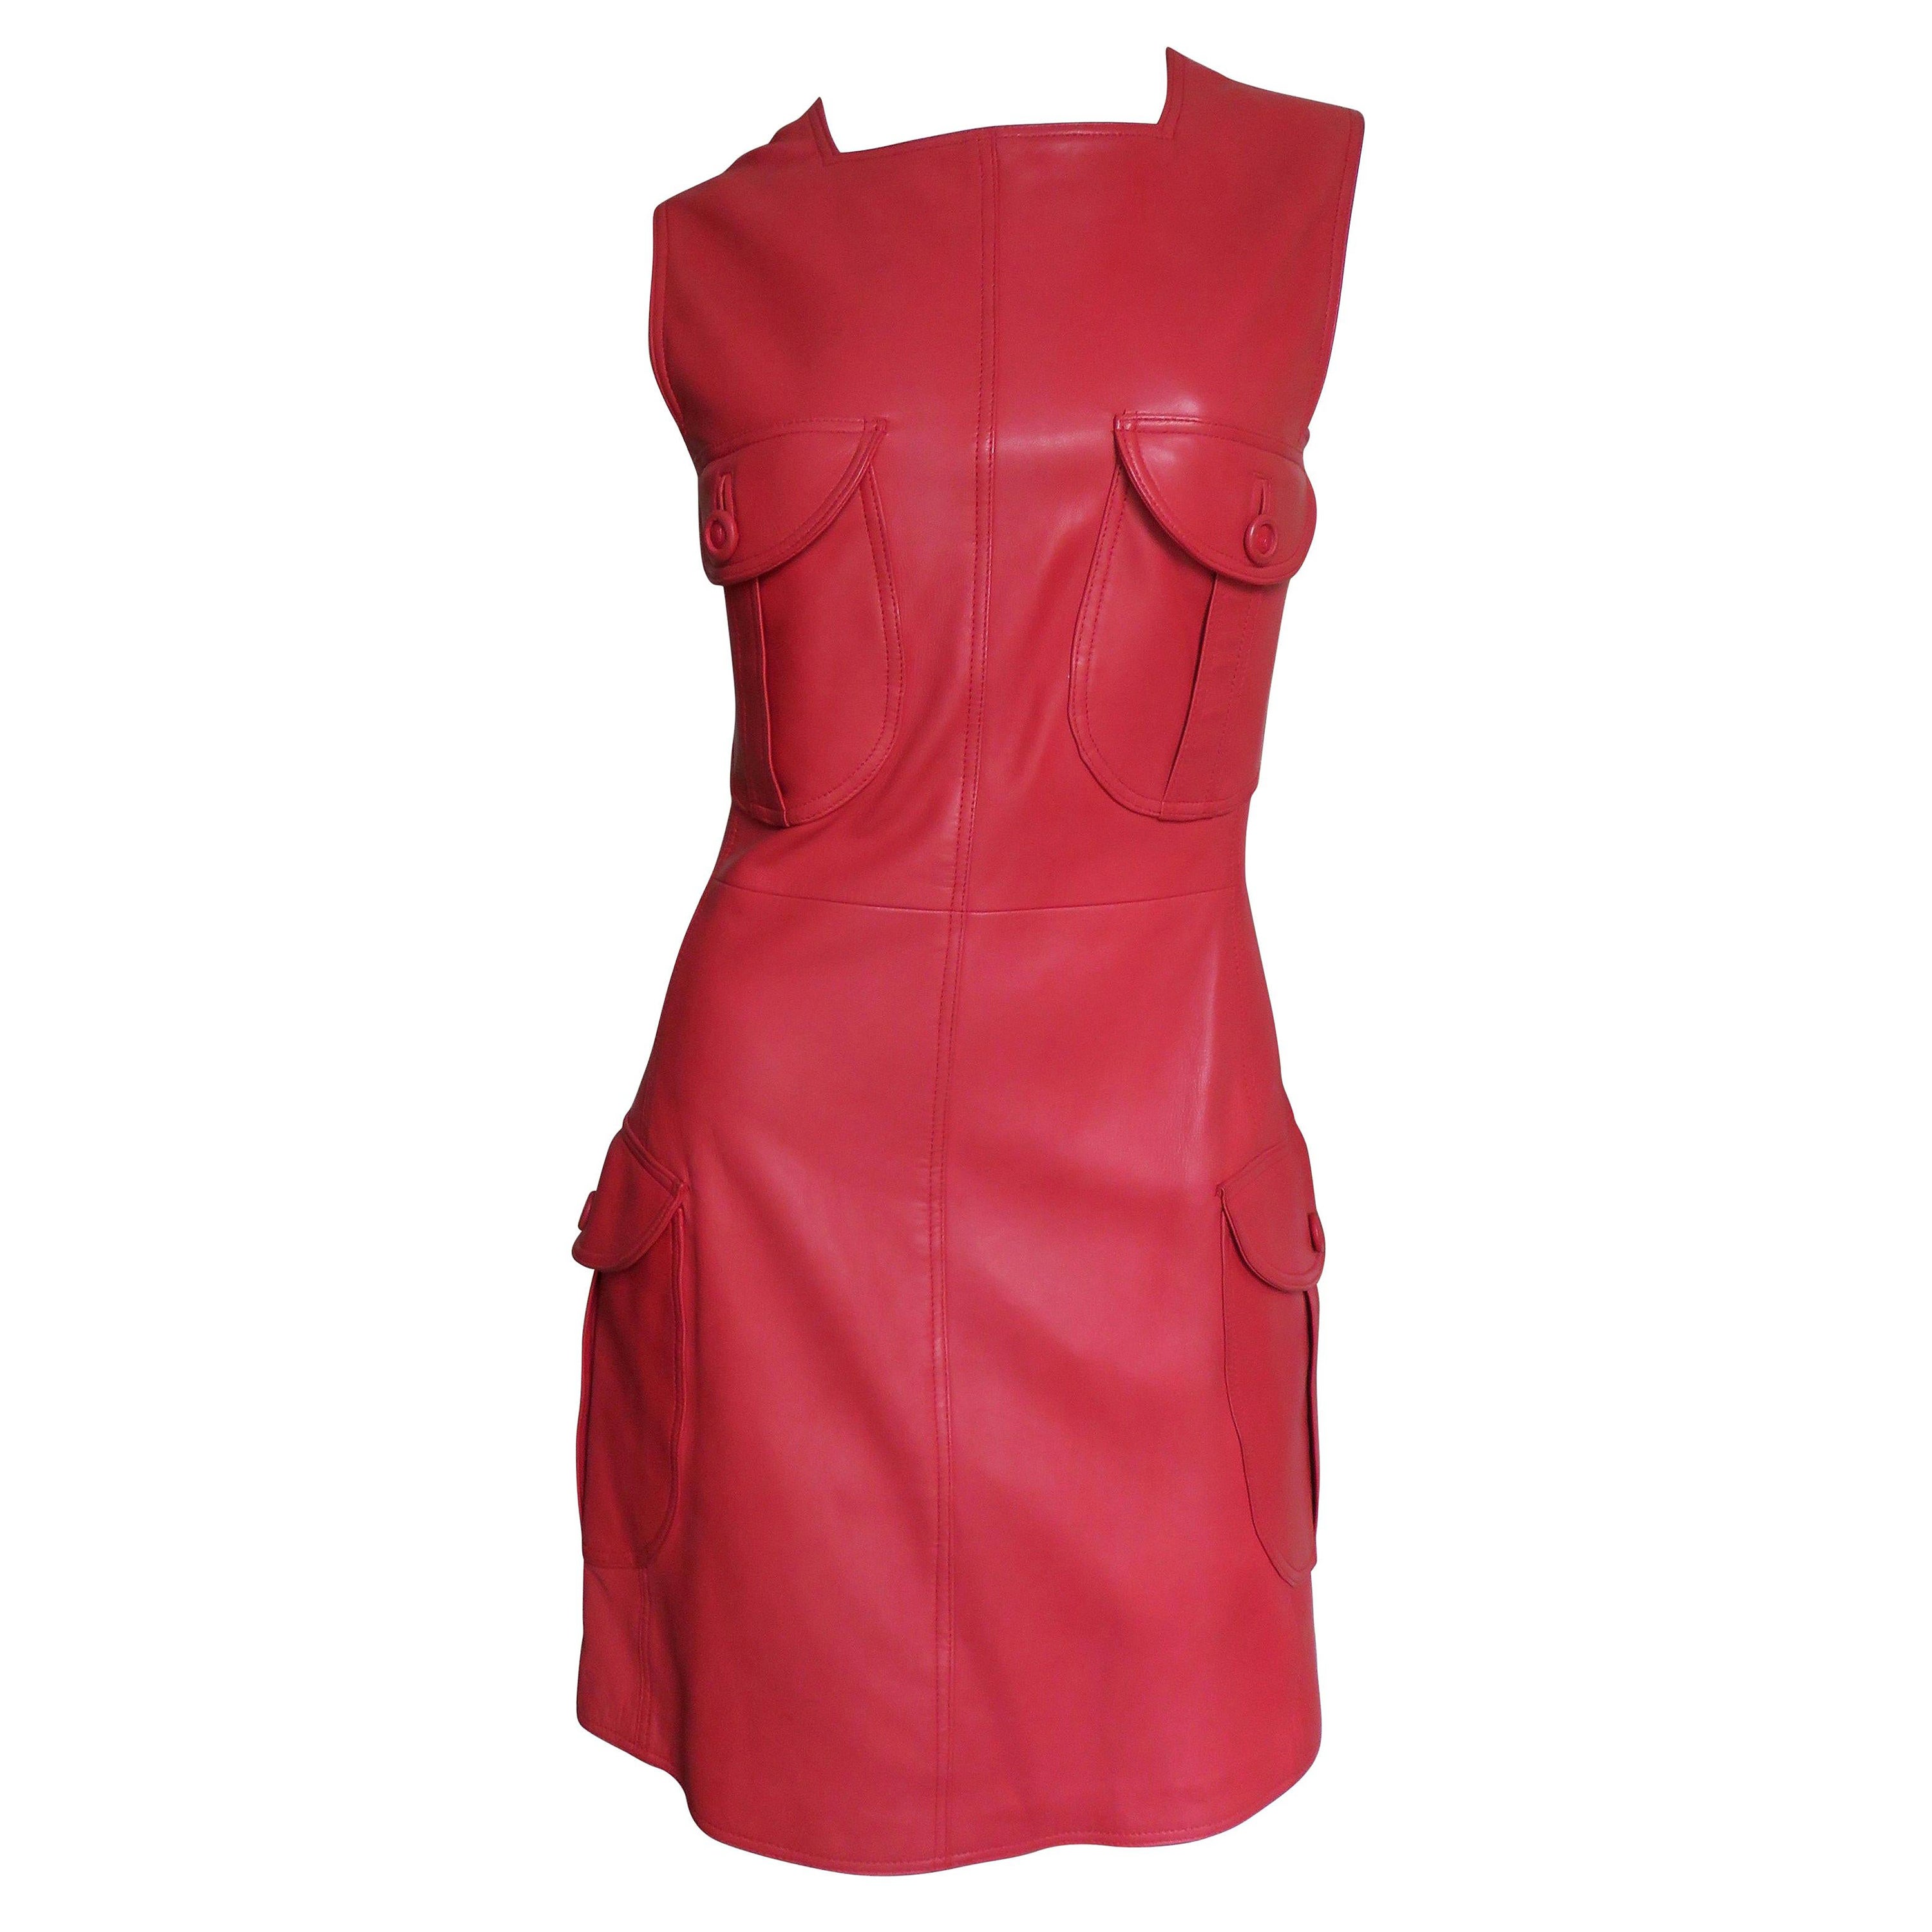 Gianni Versace New F/W 1996 Red Leather Dress For Sale